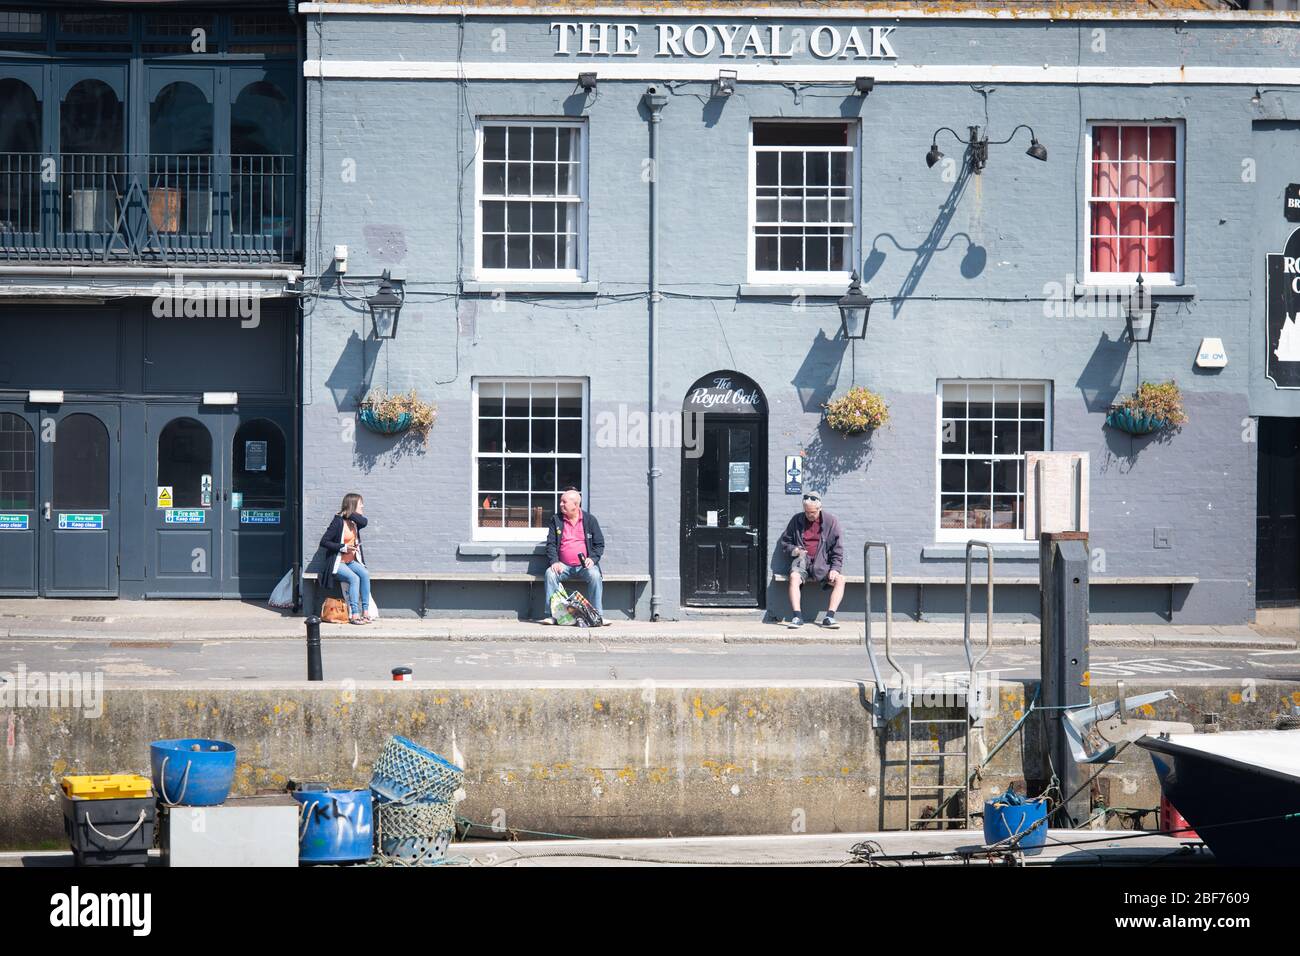 Weymouth, Dorset, UK. 11th April 2020. With the coronavirus lockdown effectively adhered to in the Dorset seaside town of Weymouth, guesthouse landlad Stock Photo